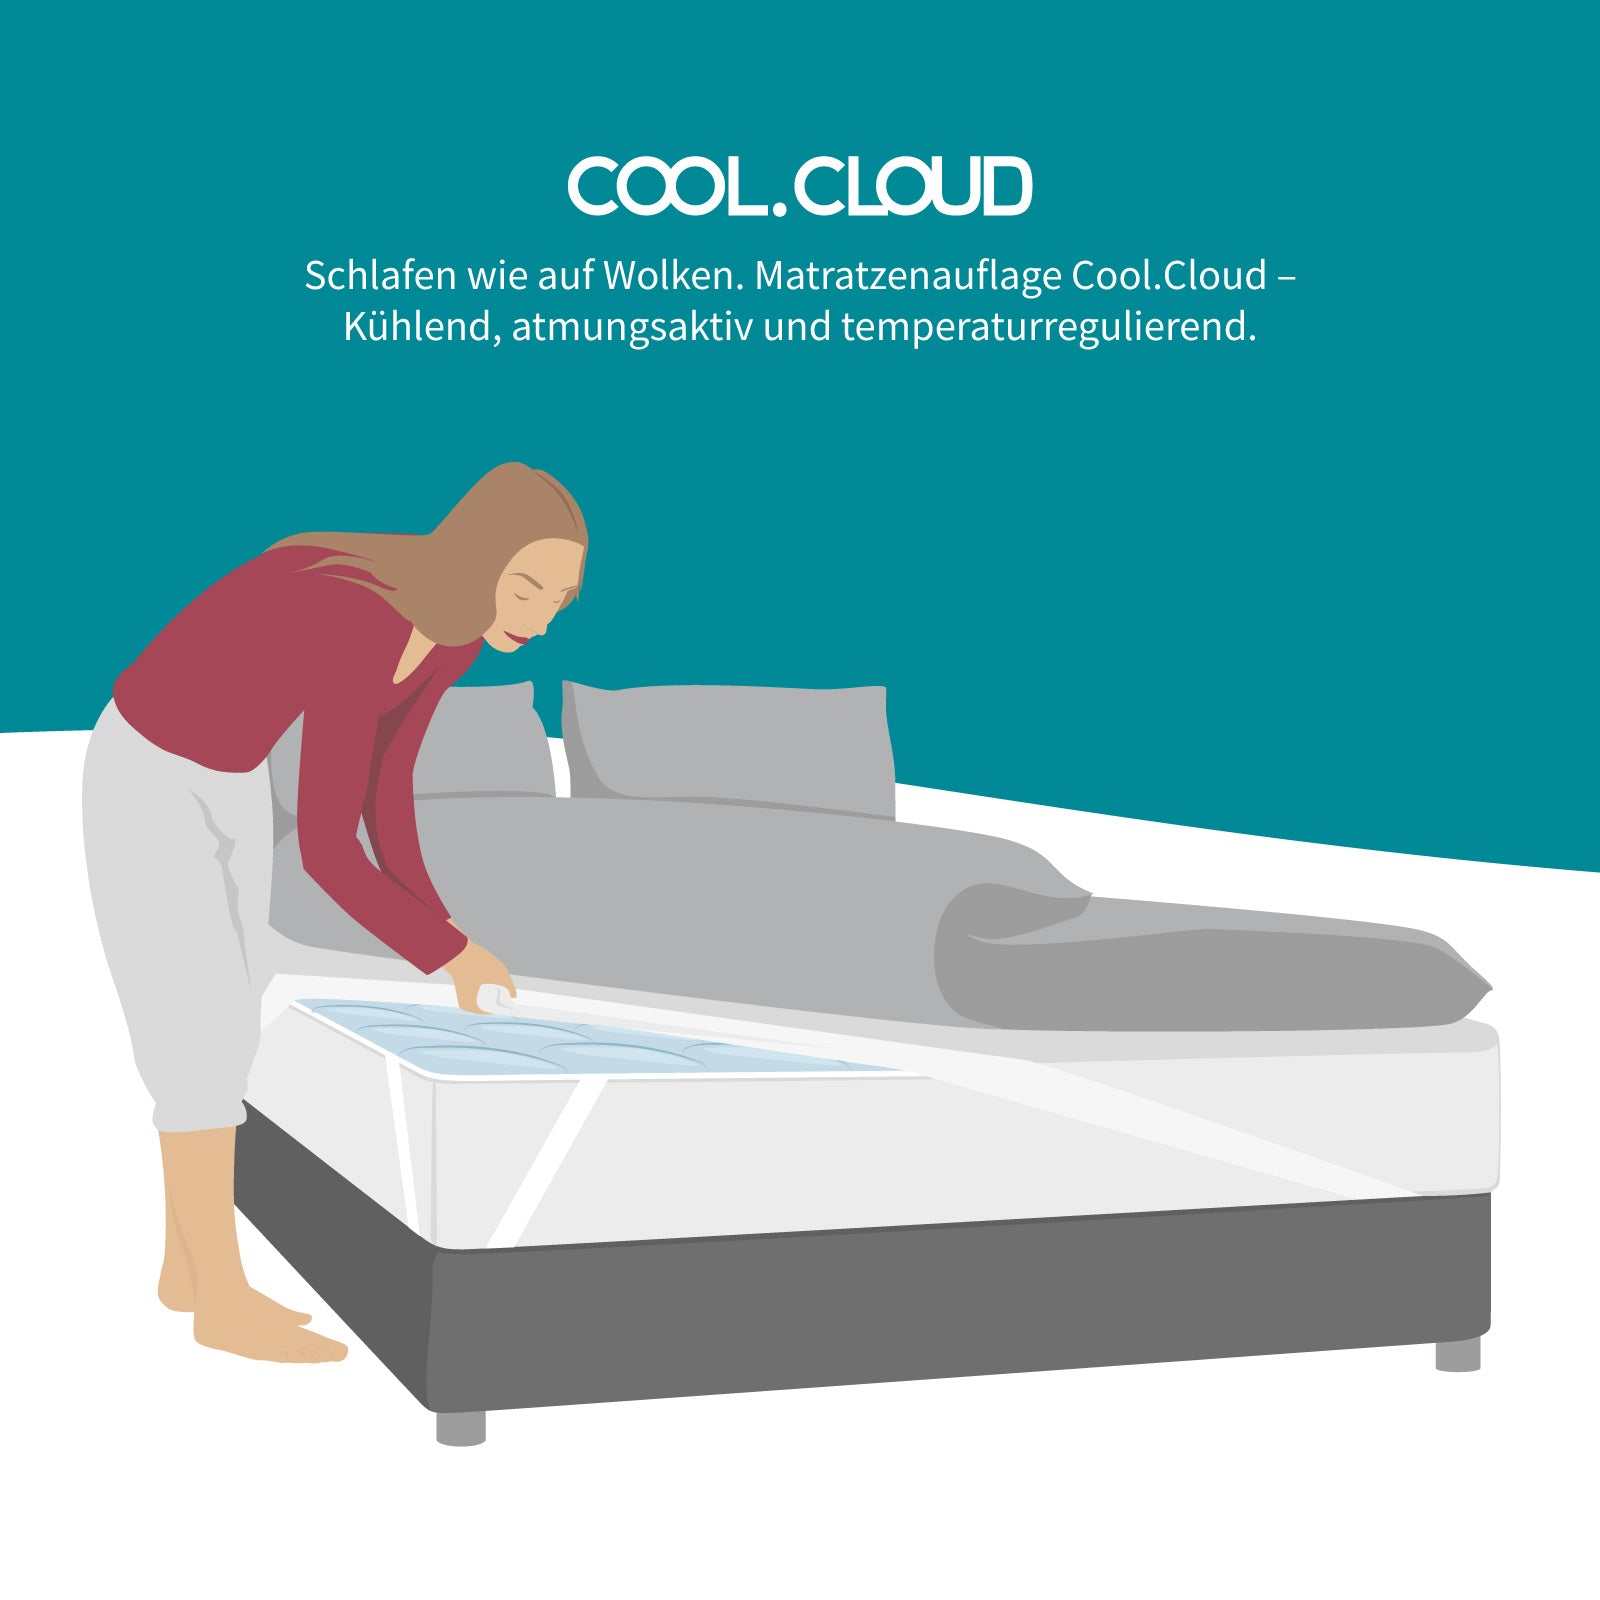 Temperature-regulating mattress cover-COOL.XPERIENCE-Less sweating, less freezing